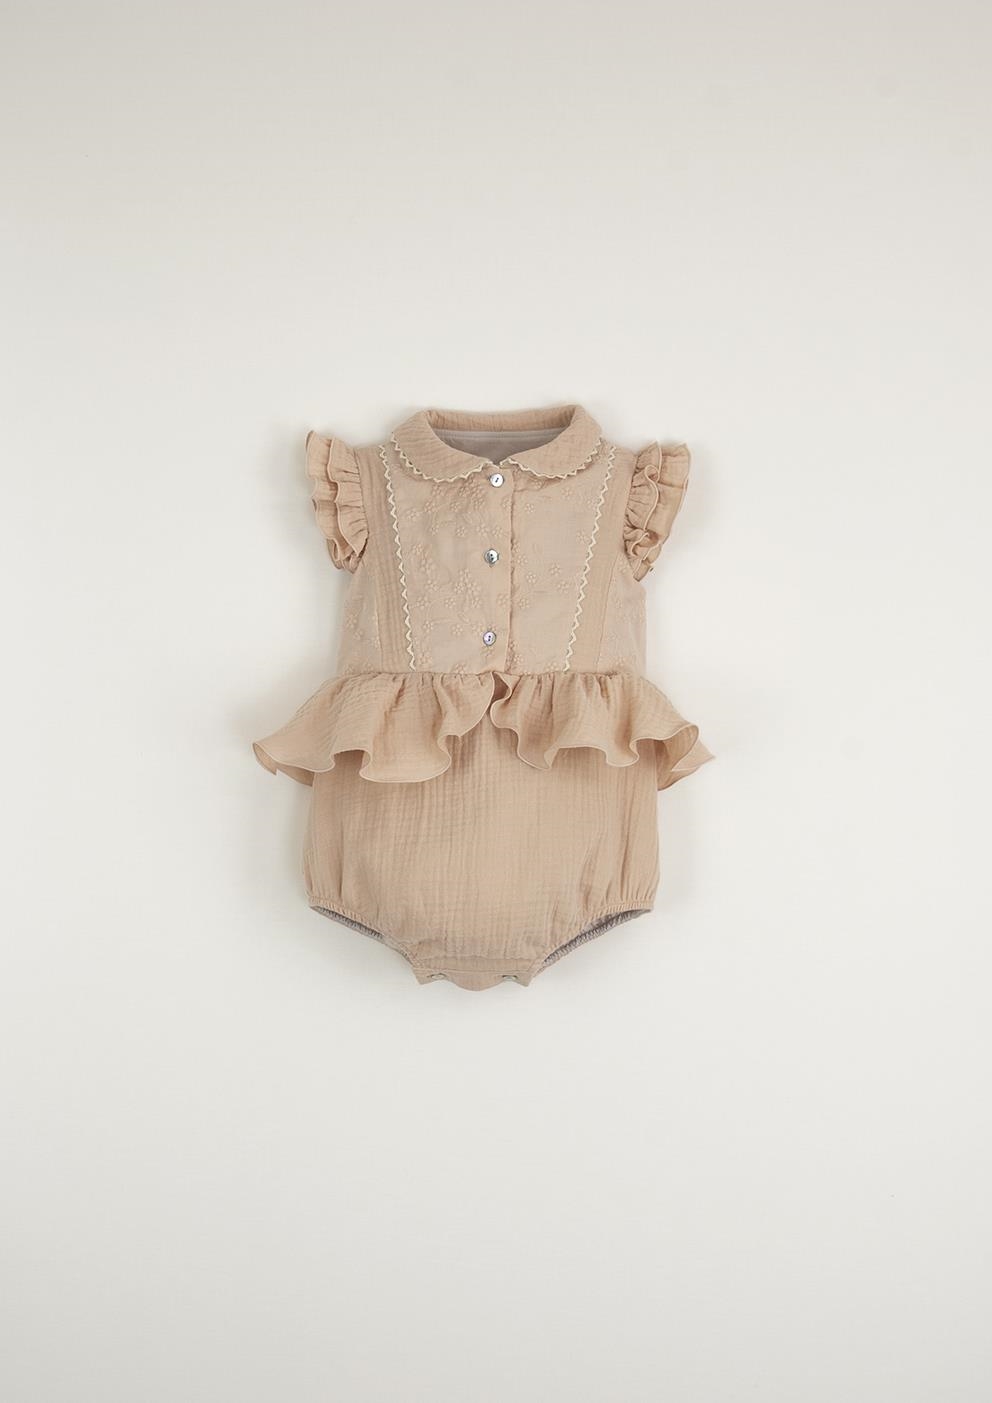 Mod.8.1 Organic pink romper suit with collar | SS23 Mod.8.1 Organic pink romper suit with collar